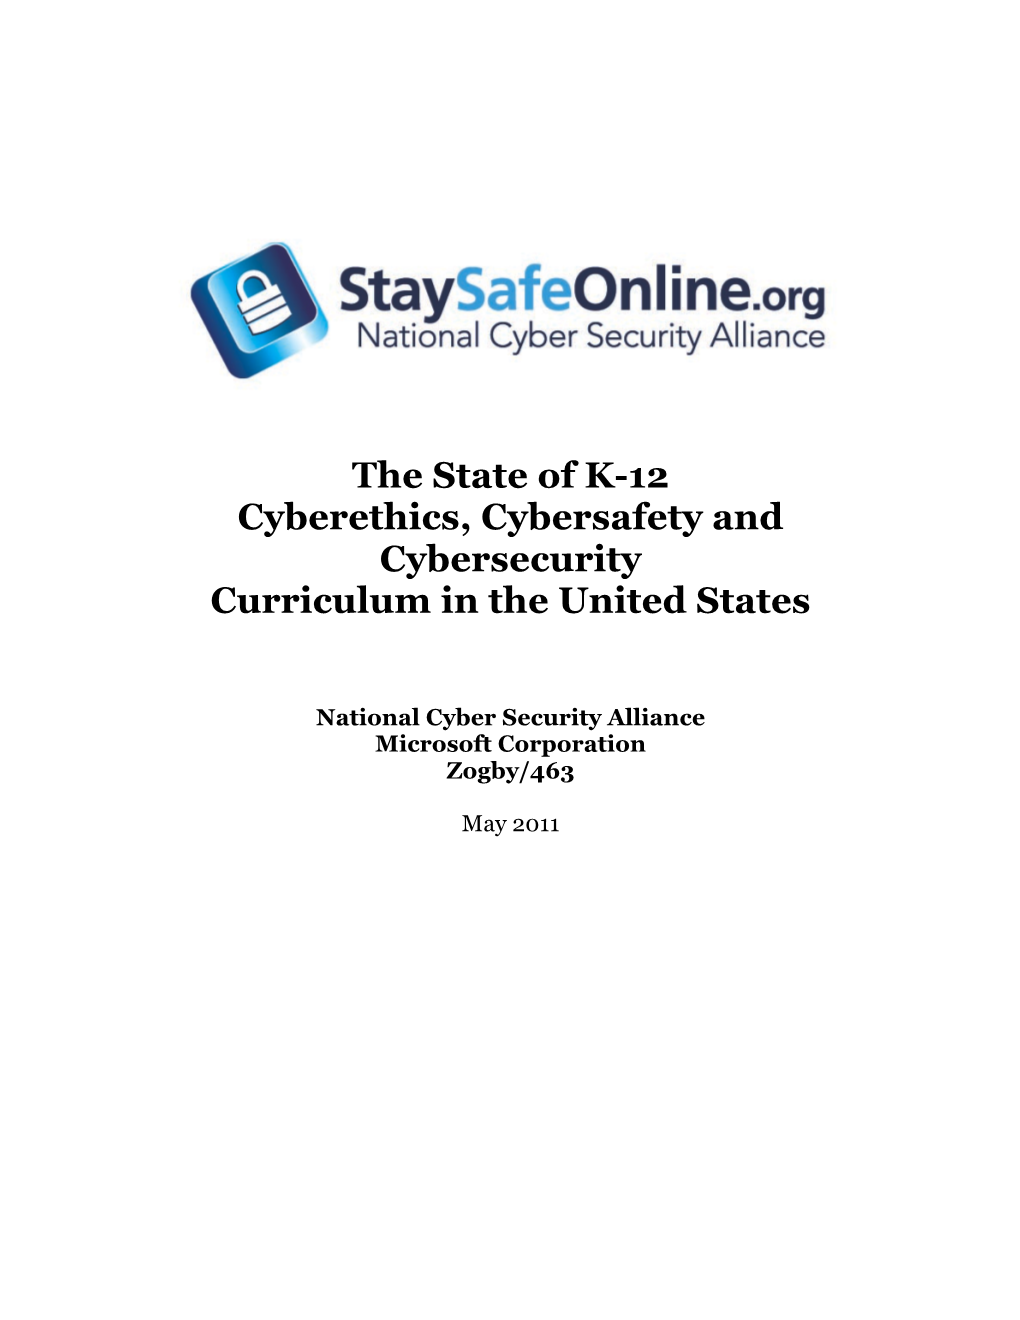 The State of K-12 Cyberethics, Cybersafety and Cybersecurity Curriculum in the United States